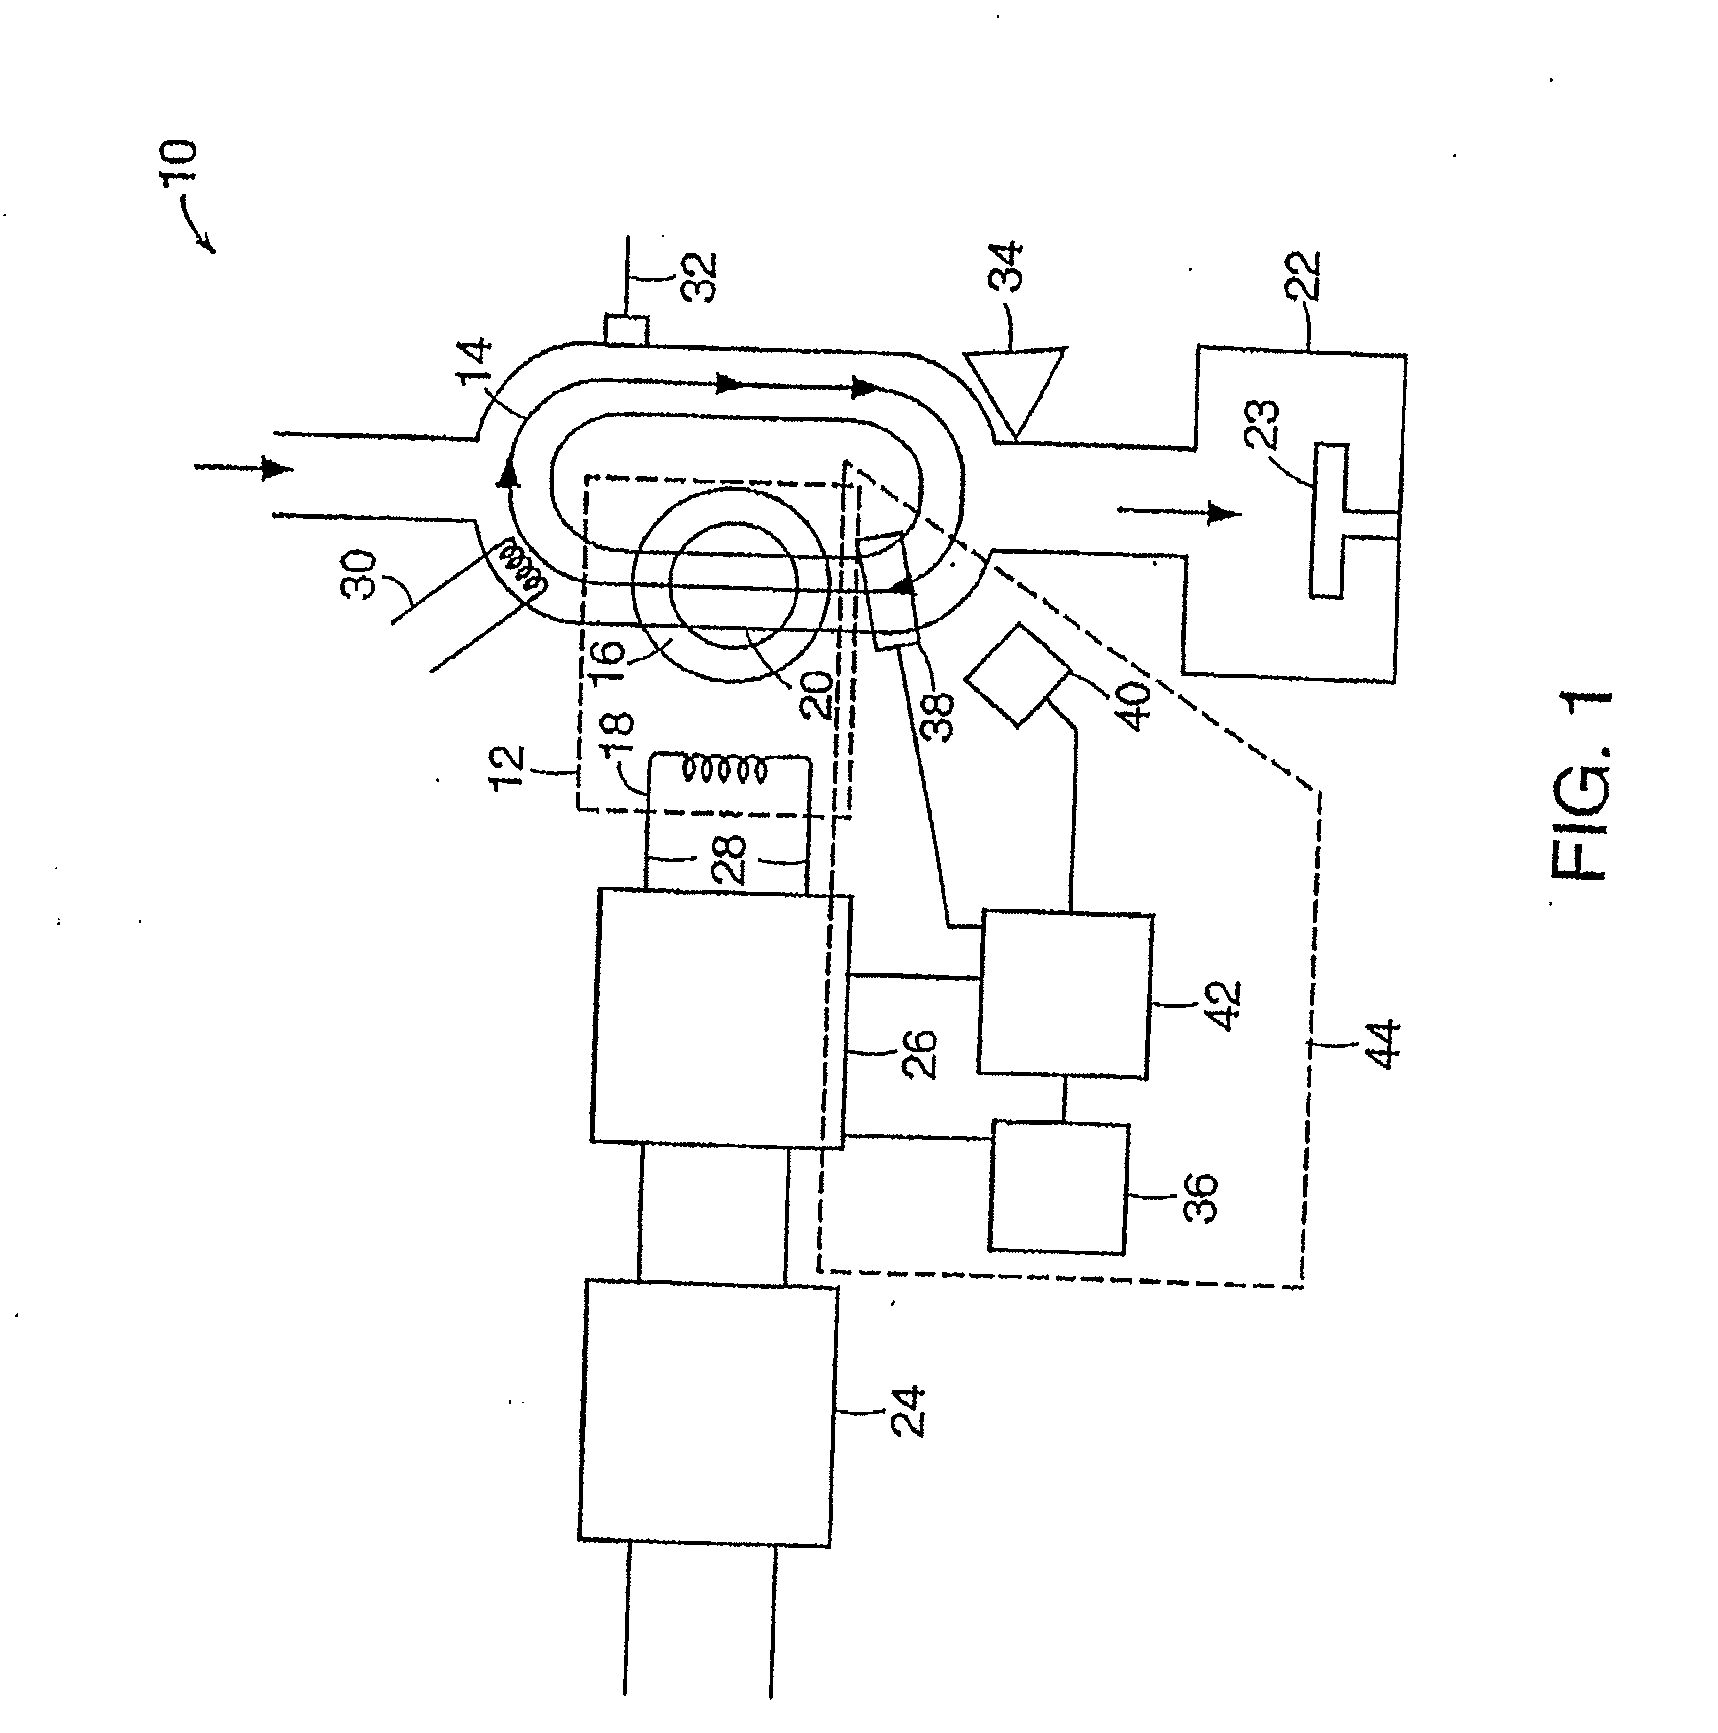 Method and Apparatus for Processing Metal Bearing Gases